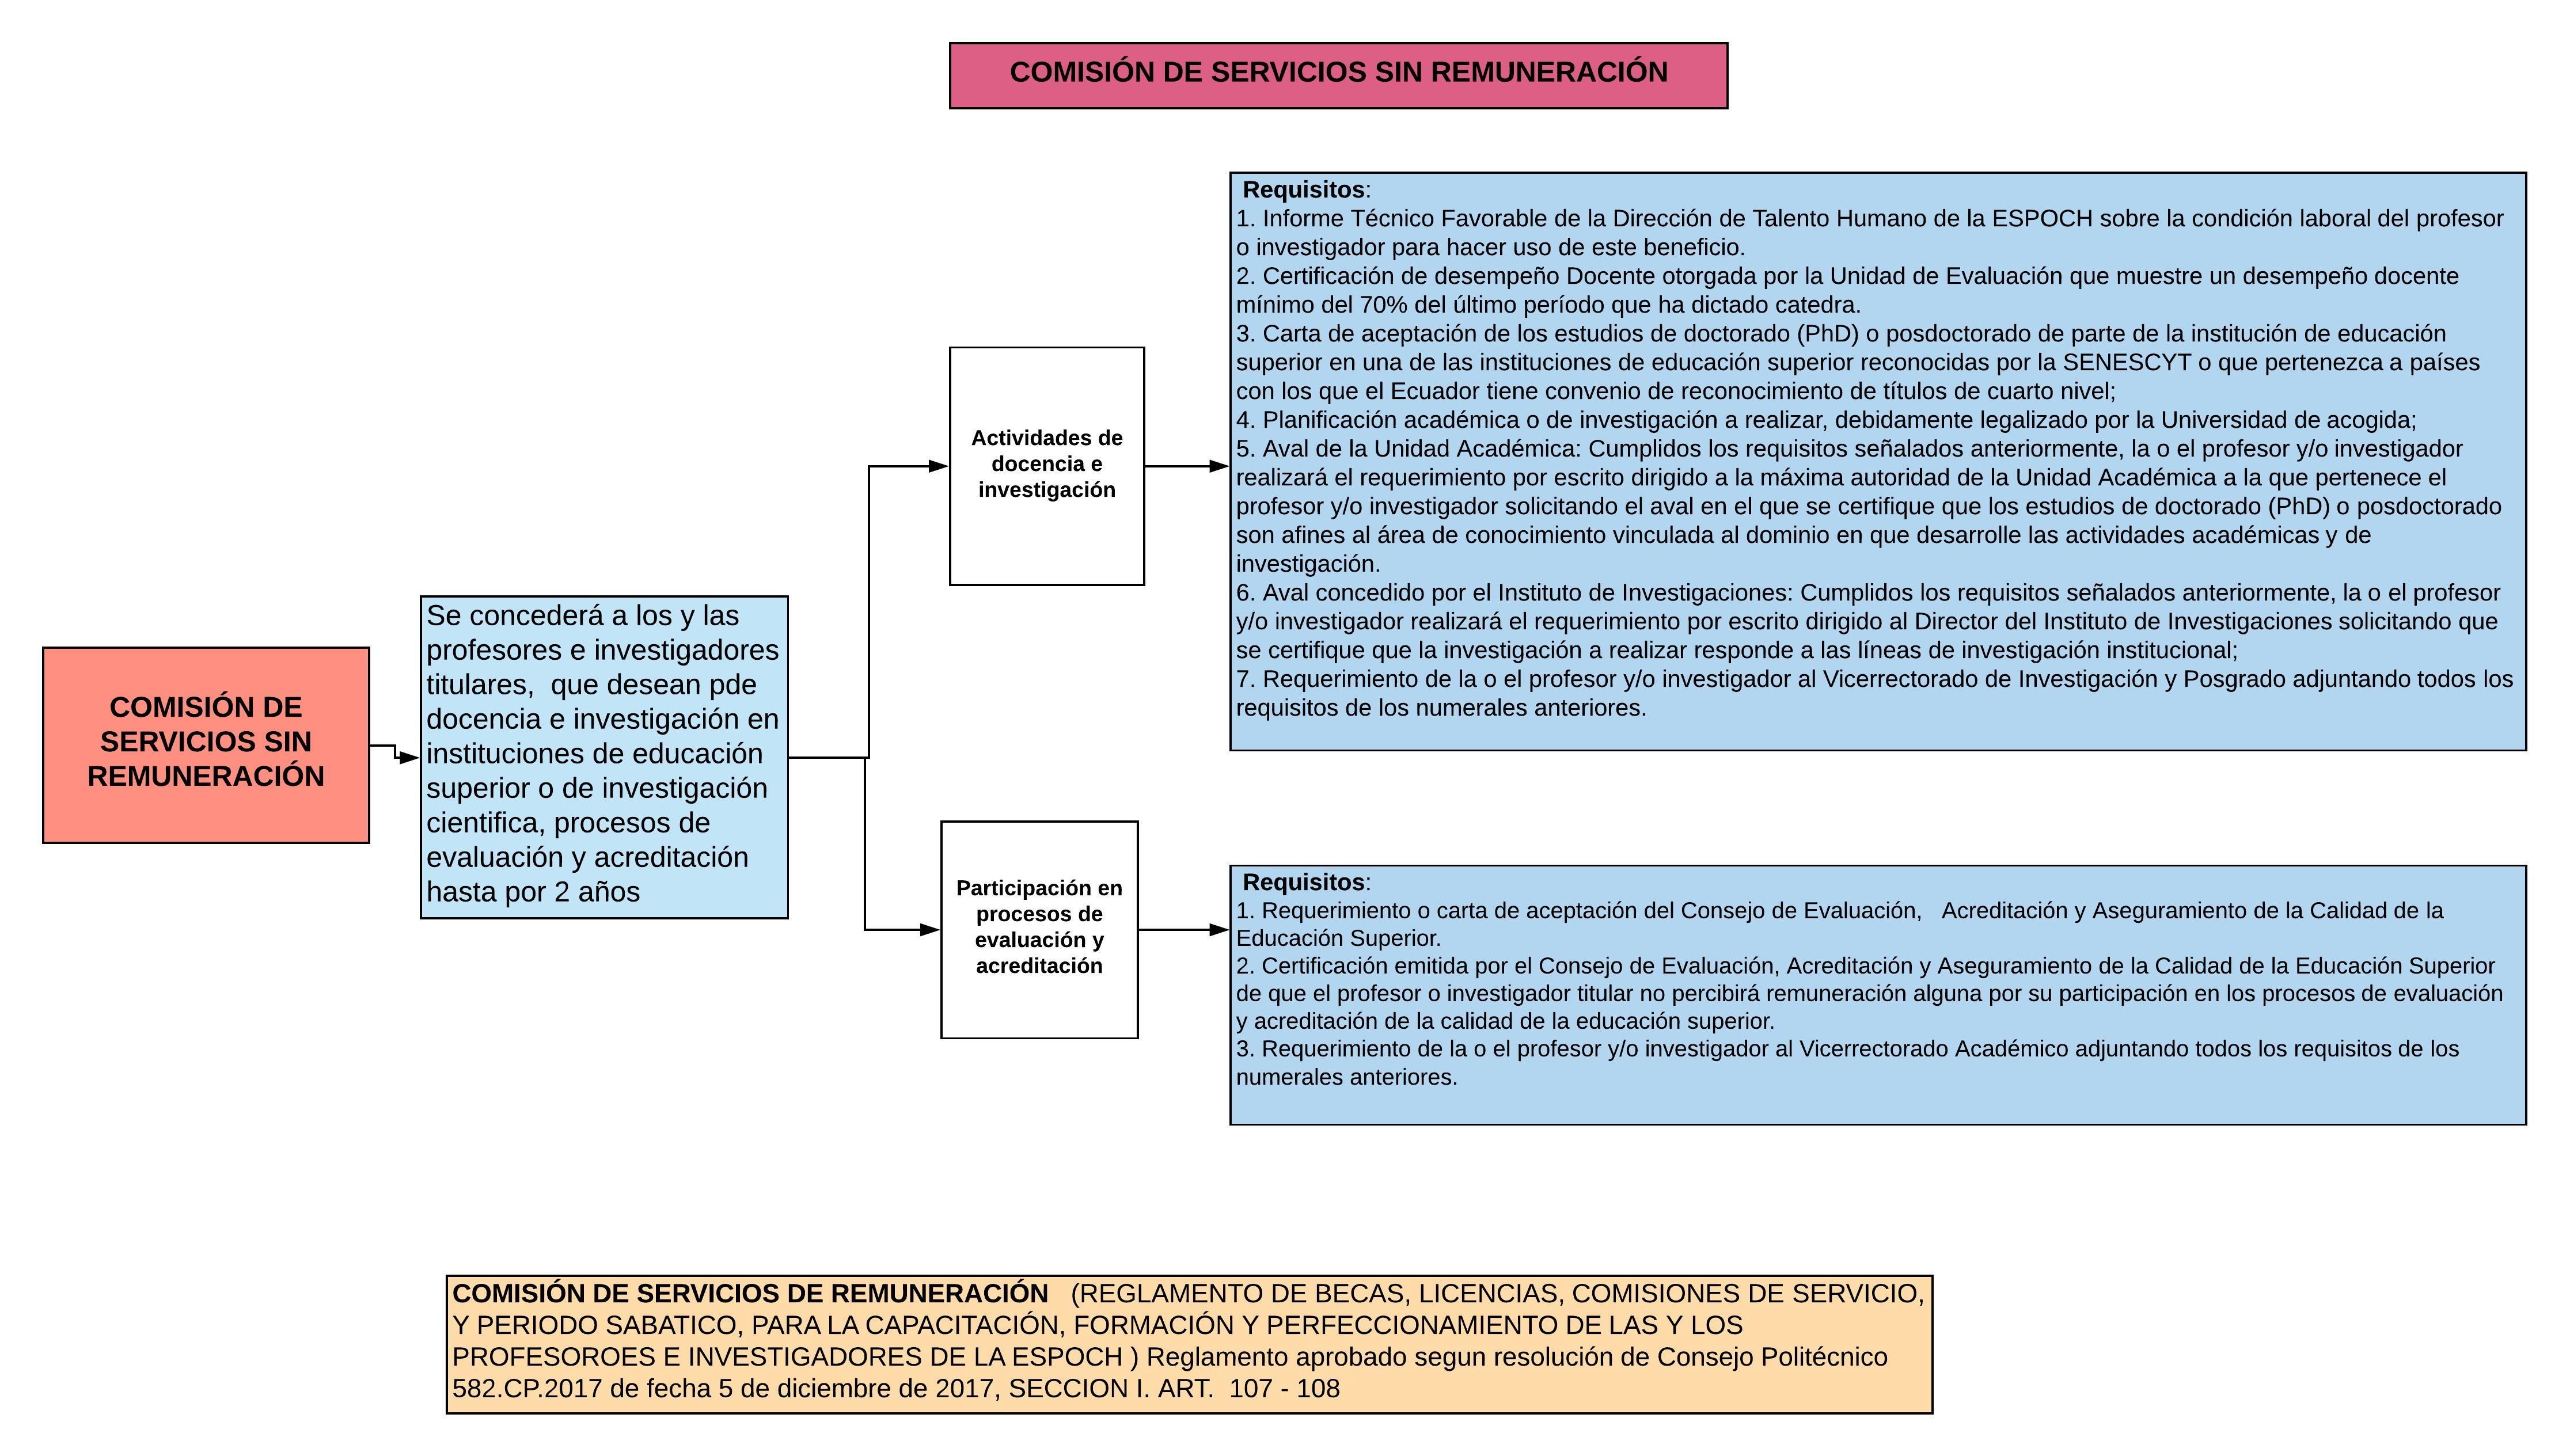 ORGANIZATIONAL CHART OF COMMISSION OF SERVICES WITHOUT REMUNERATION